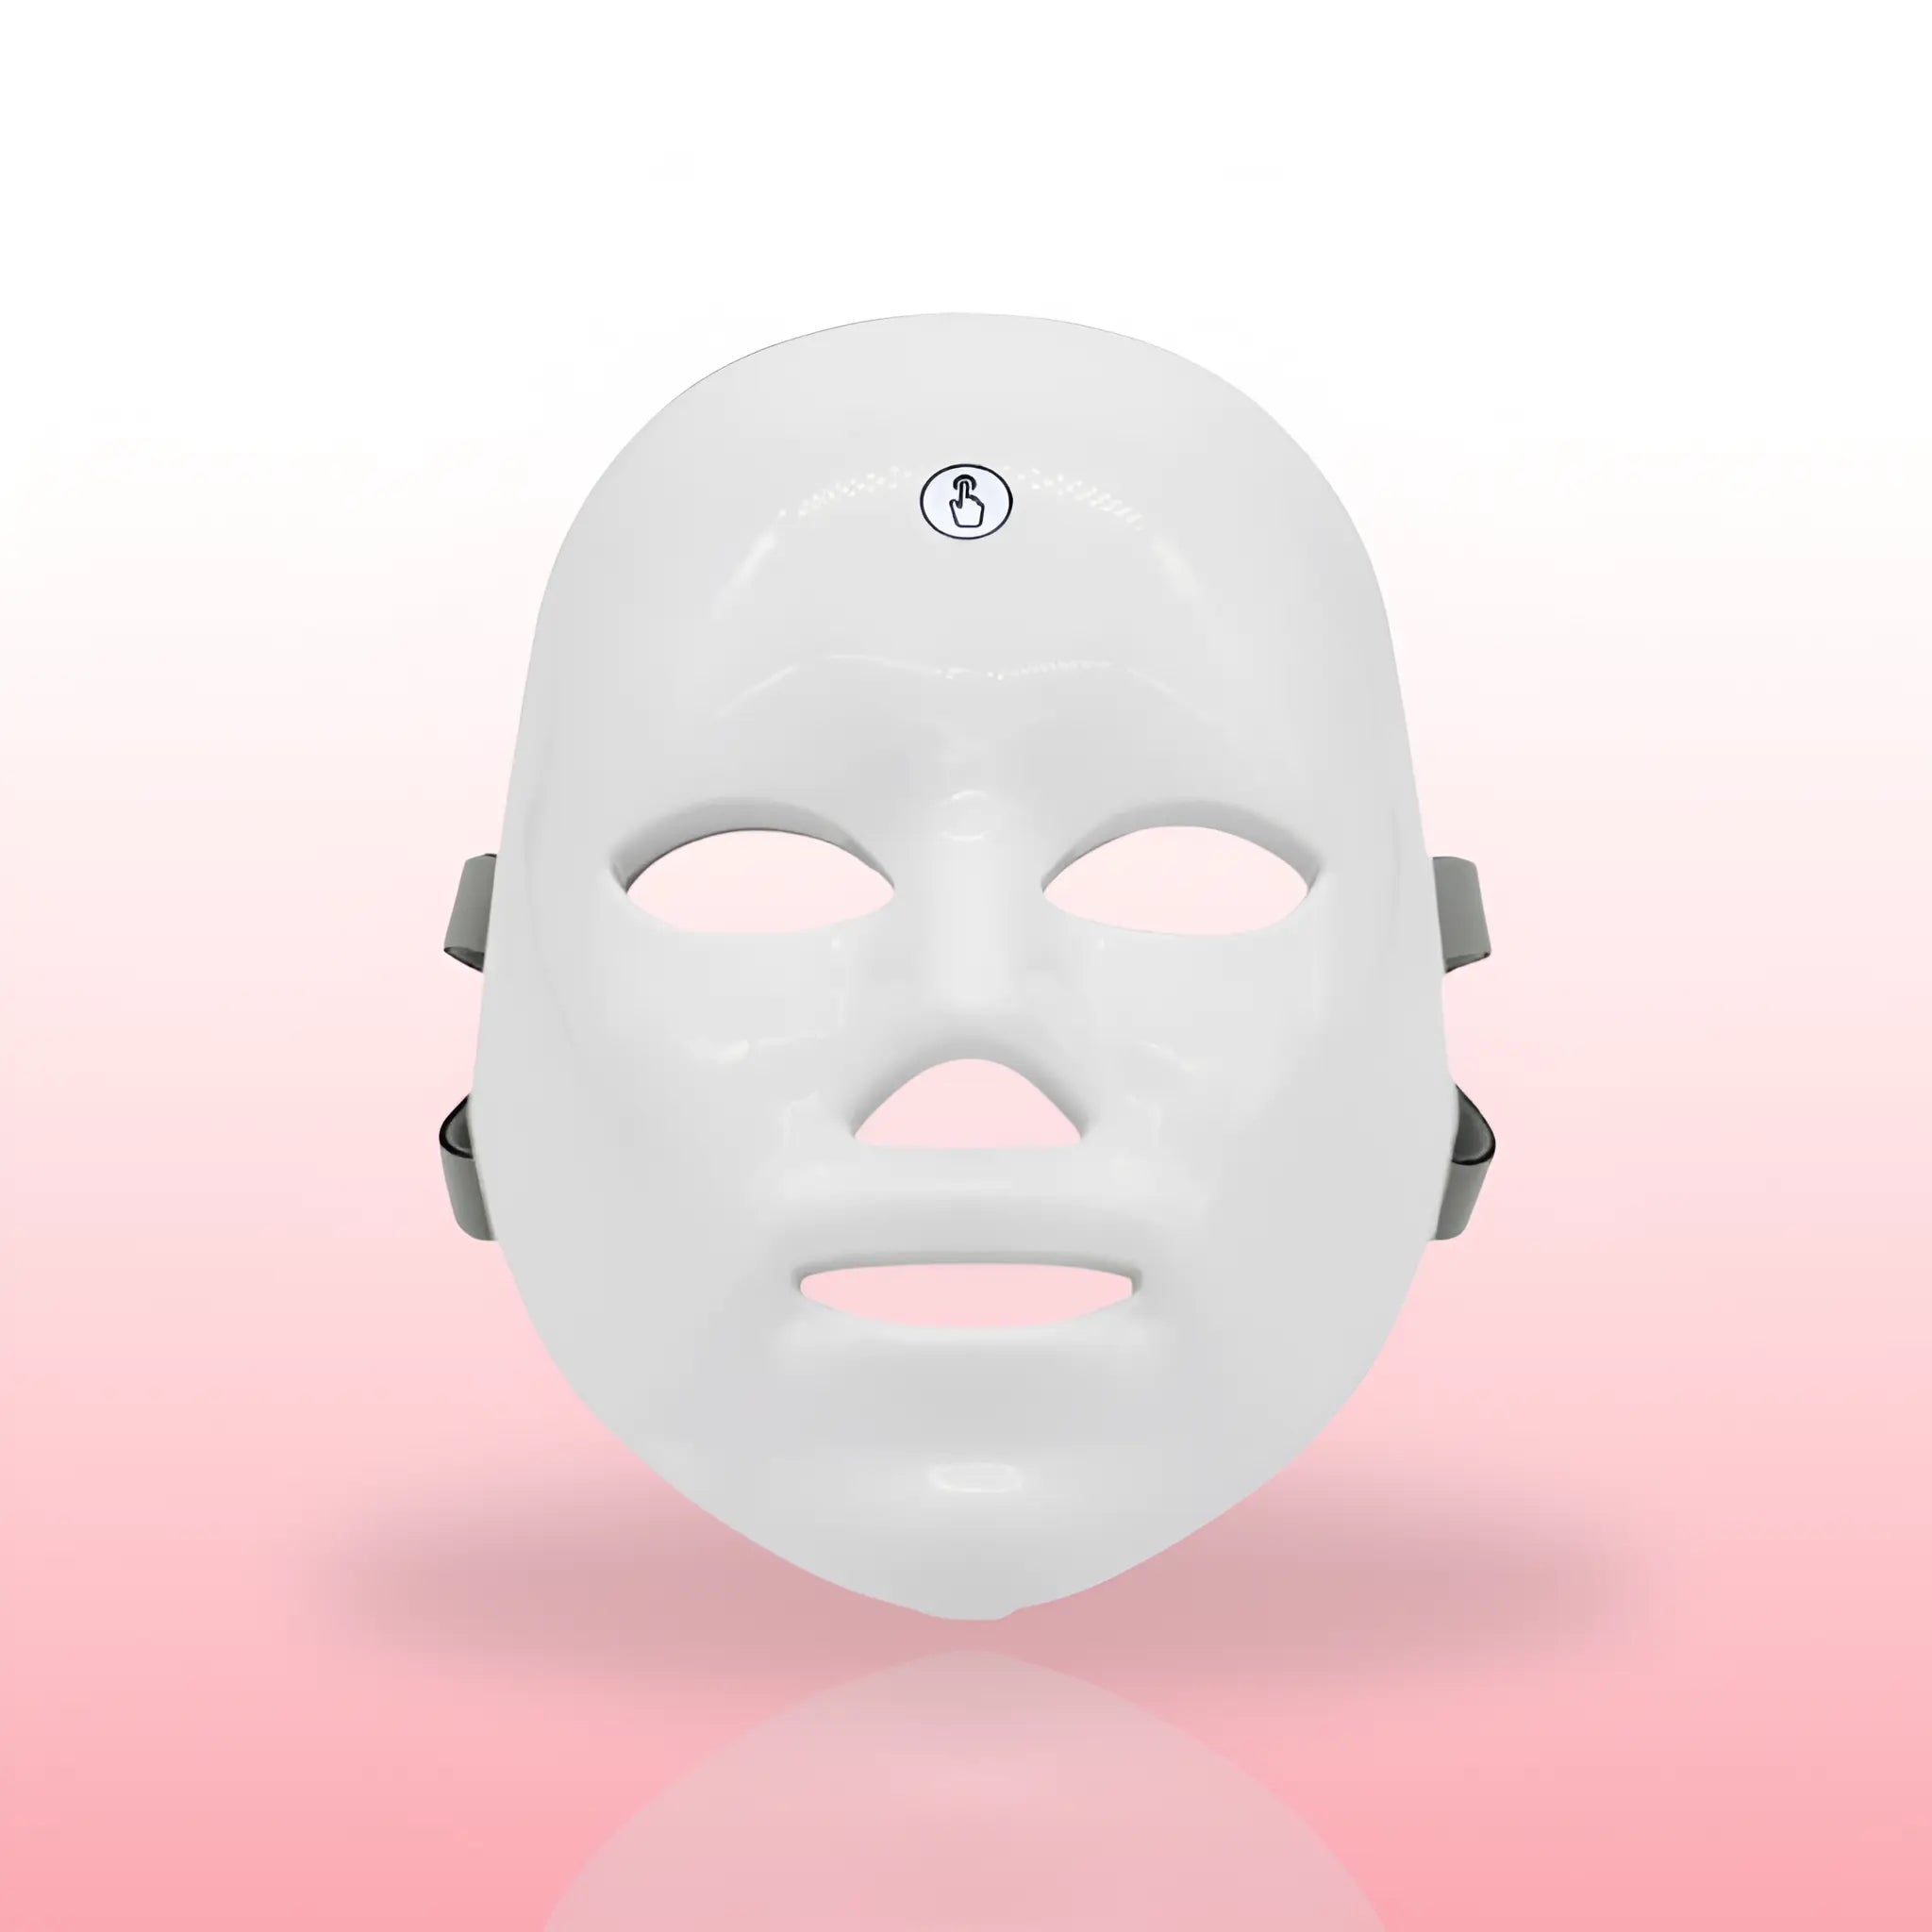 LED Light Therapy Korean-Inspired Face Mask